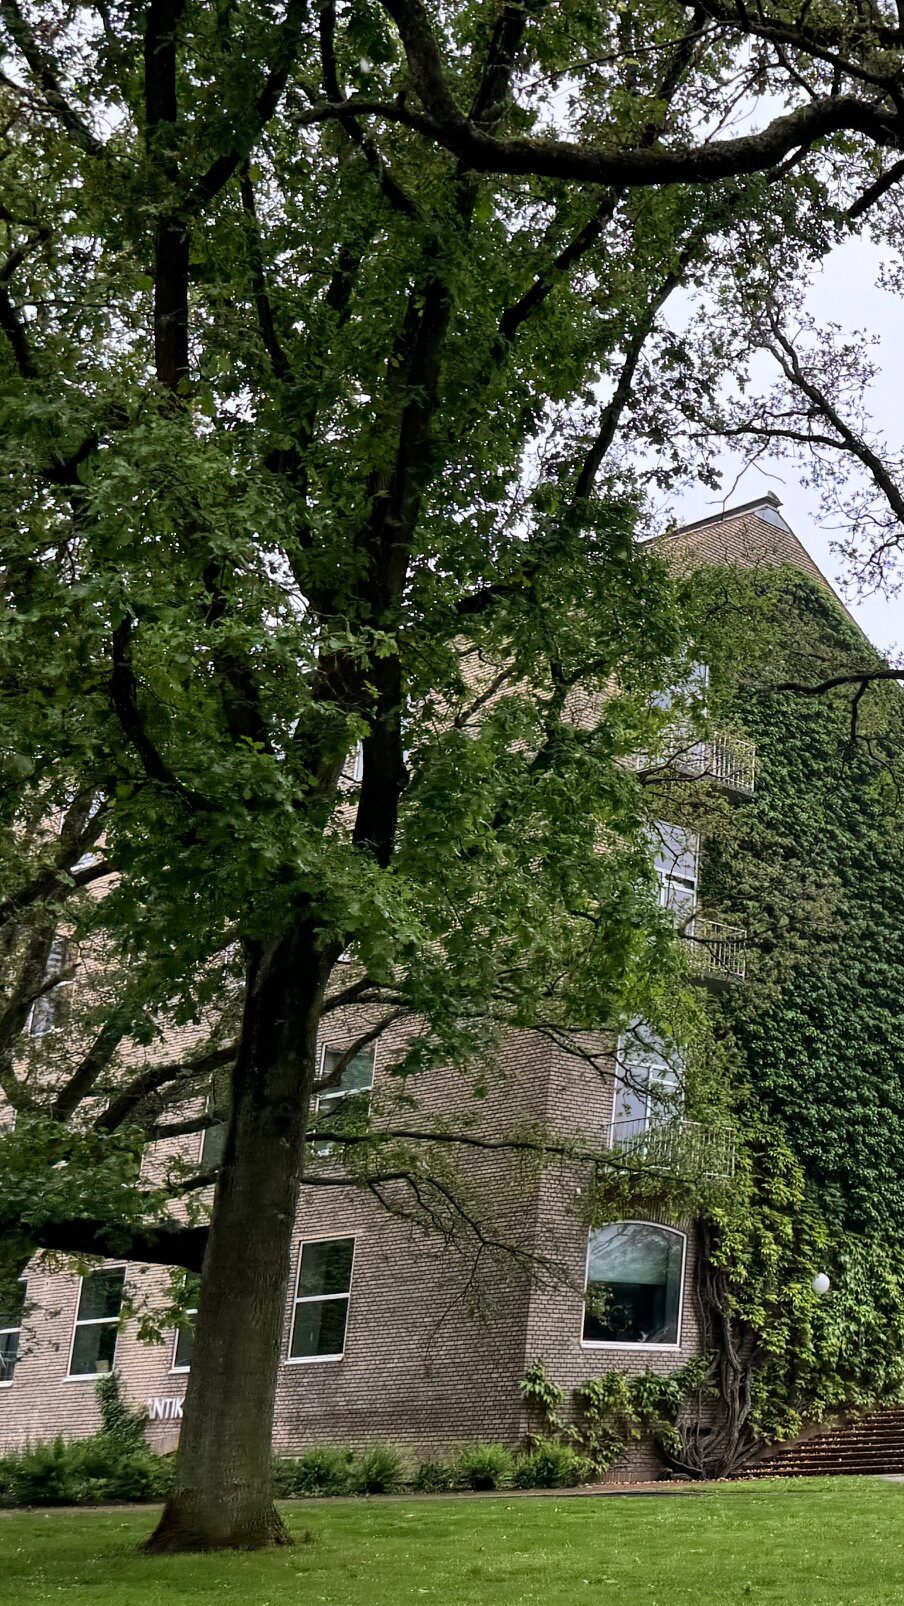 The ivy colored walls of a building as part of Aarhus University in Denmark.